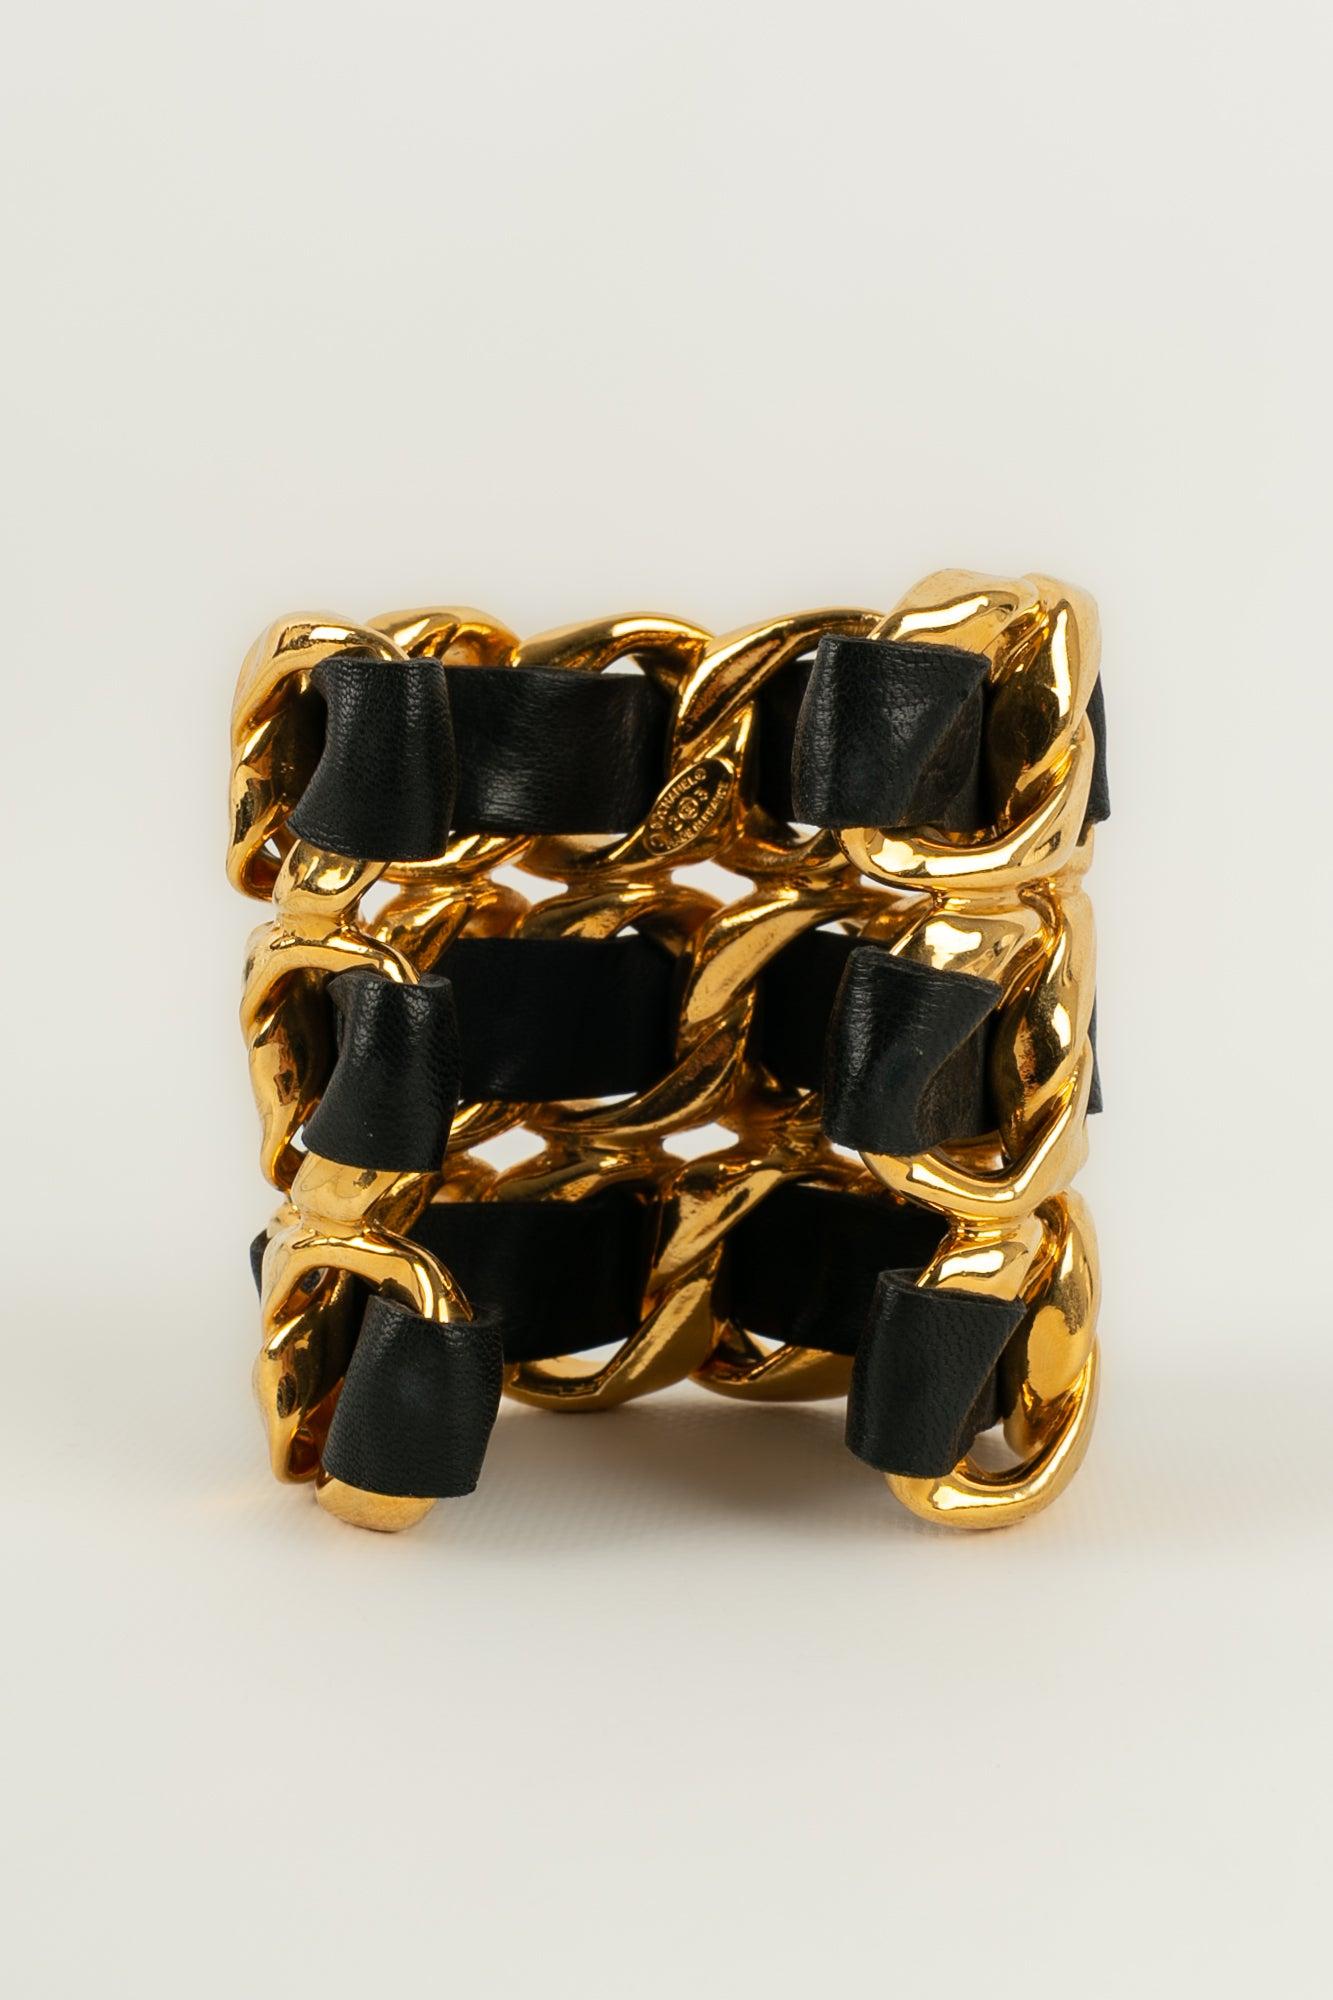 Chanel Cuff Bracelet in Golden Metal and Black Leather In Excellent Condition For Sale In SAINT-OUEN-SUR-SEINE, FR